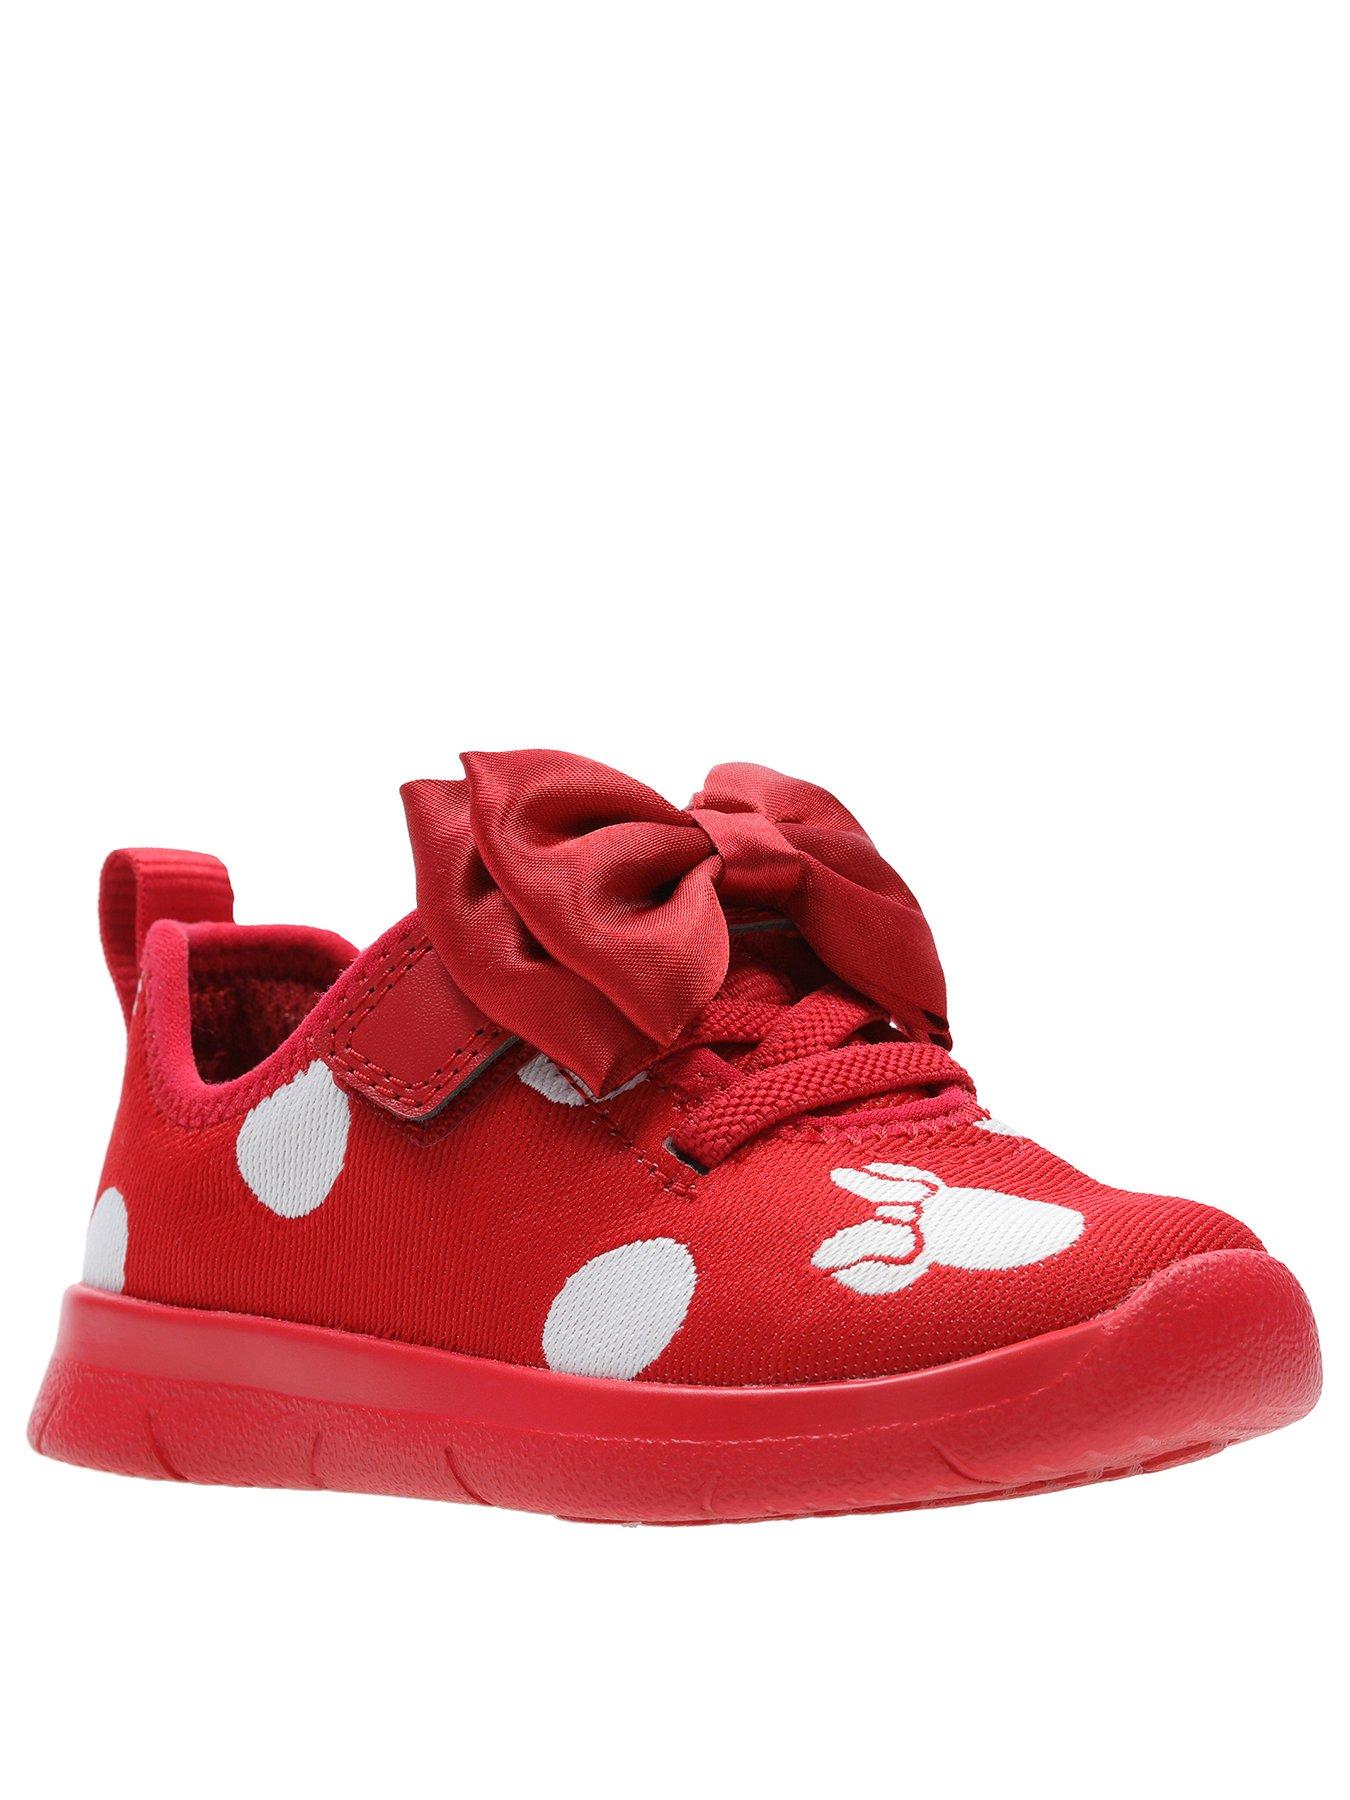 minnie mouse trainers clarks